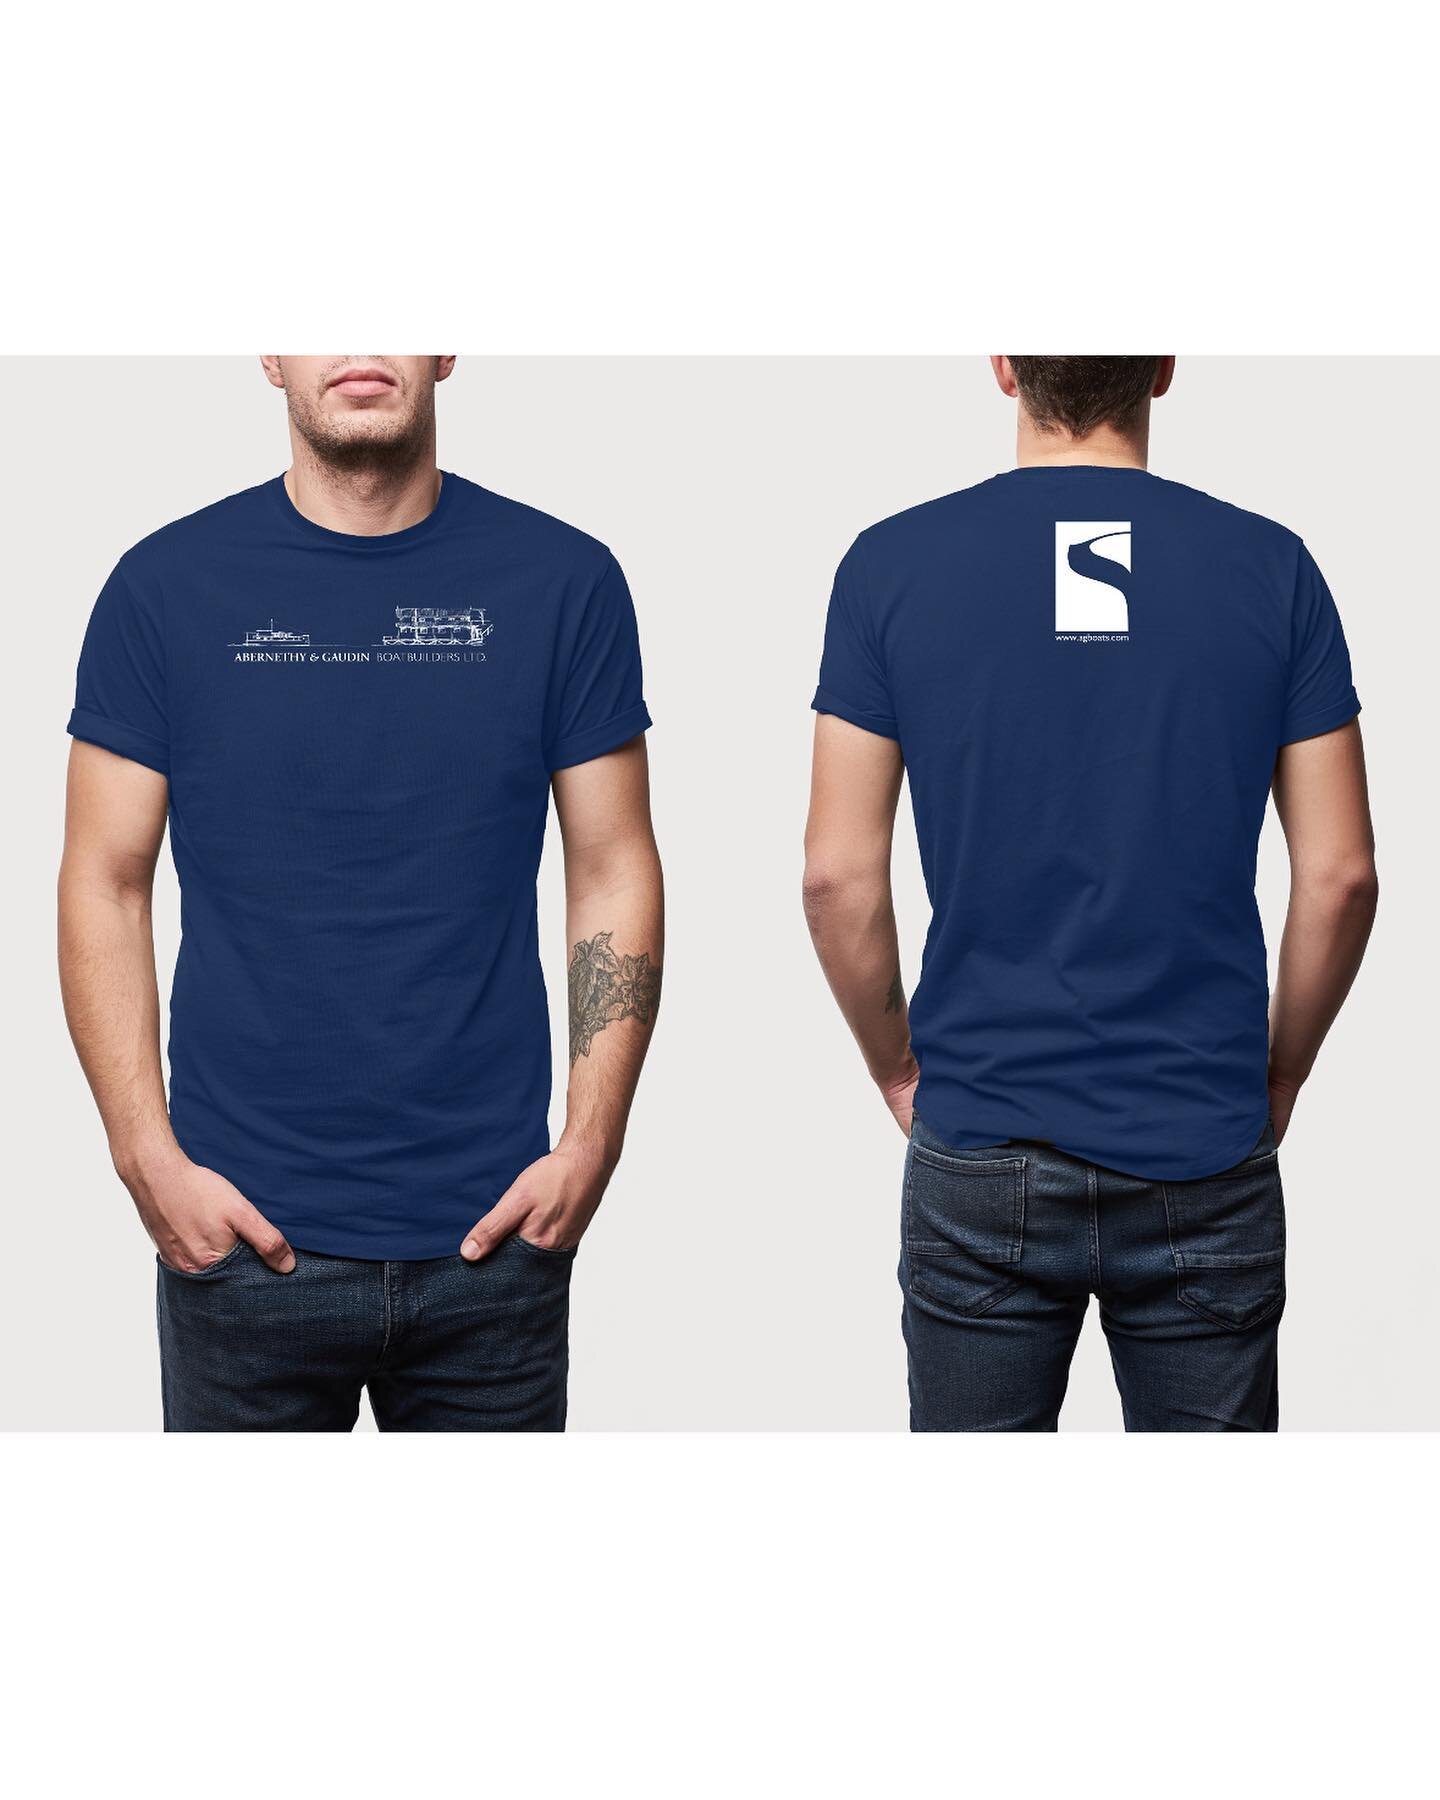 Some new T&rsquo;s are on their way. The image is a classic boat coming into the the shop at Brentwood Bay. Logo on the back.